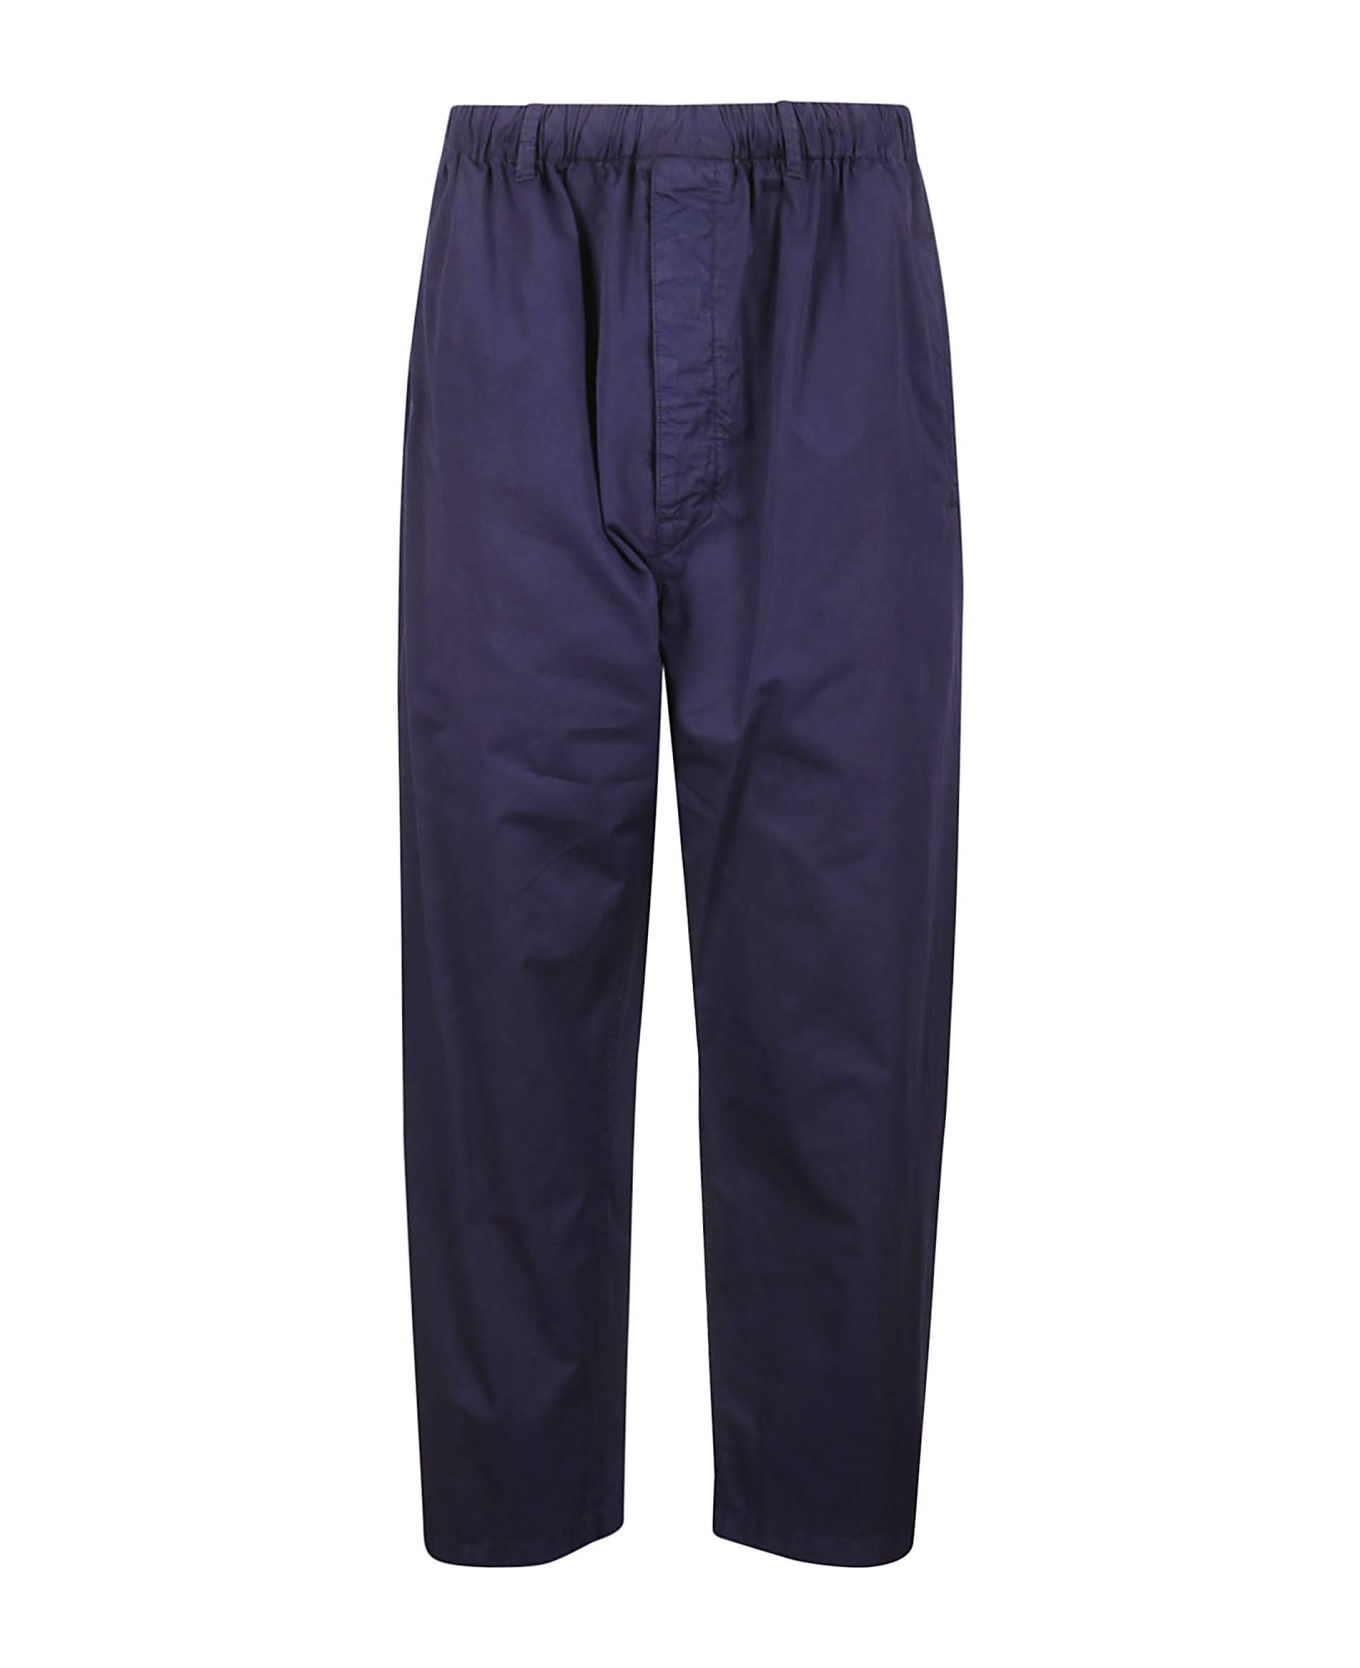 Lemaire Relaxed Pants - BLUE VIOLET